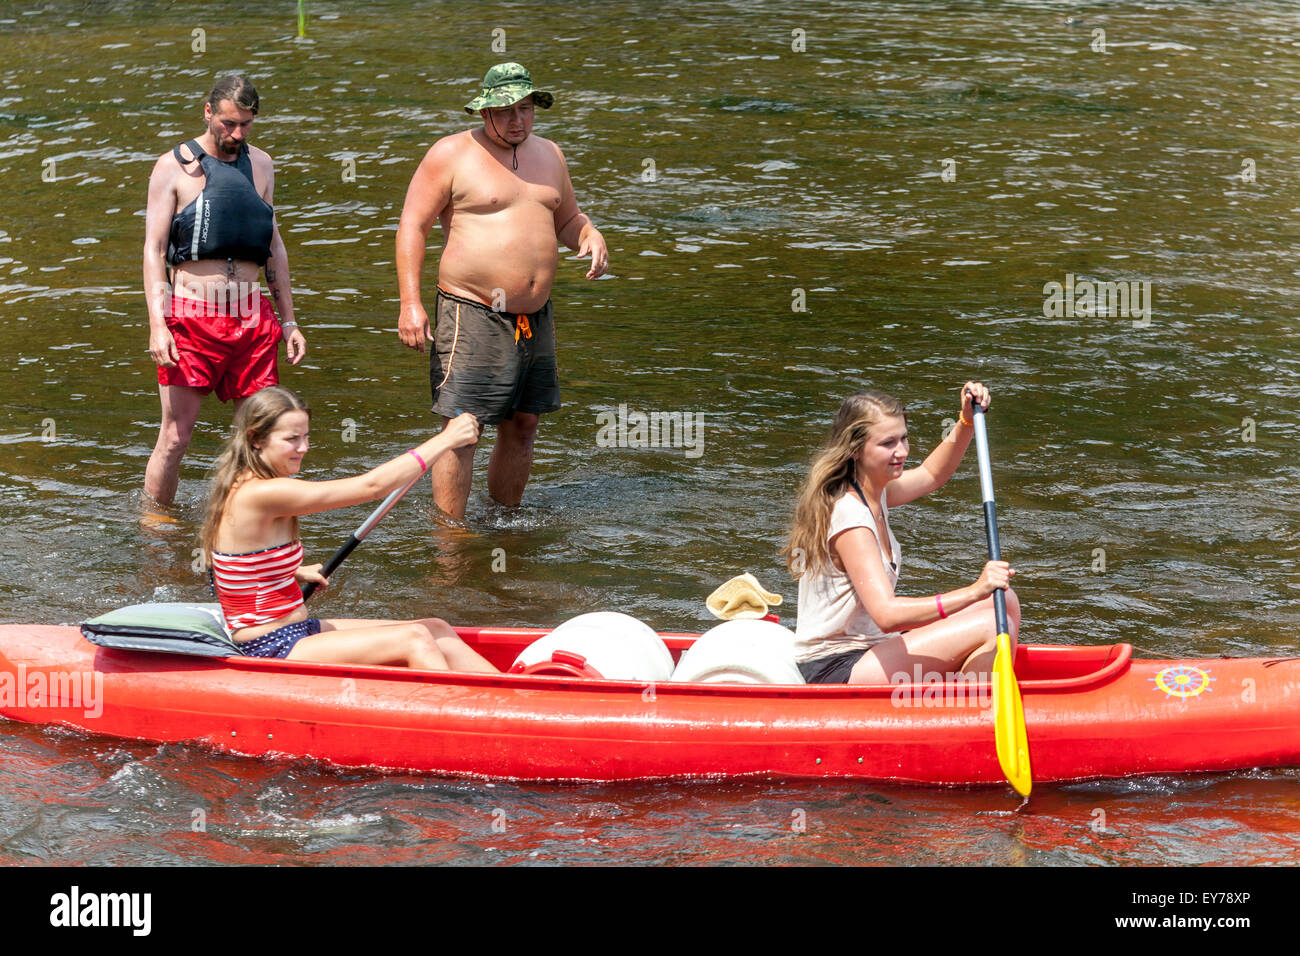 People going down by the river Vltava, girls canoeing river, South Bohemia, Czech Republic summer Stock Photo